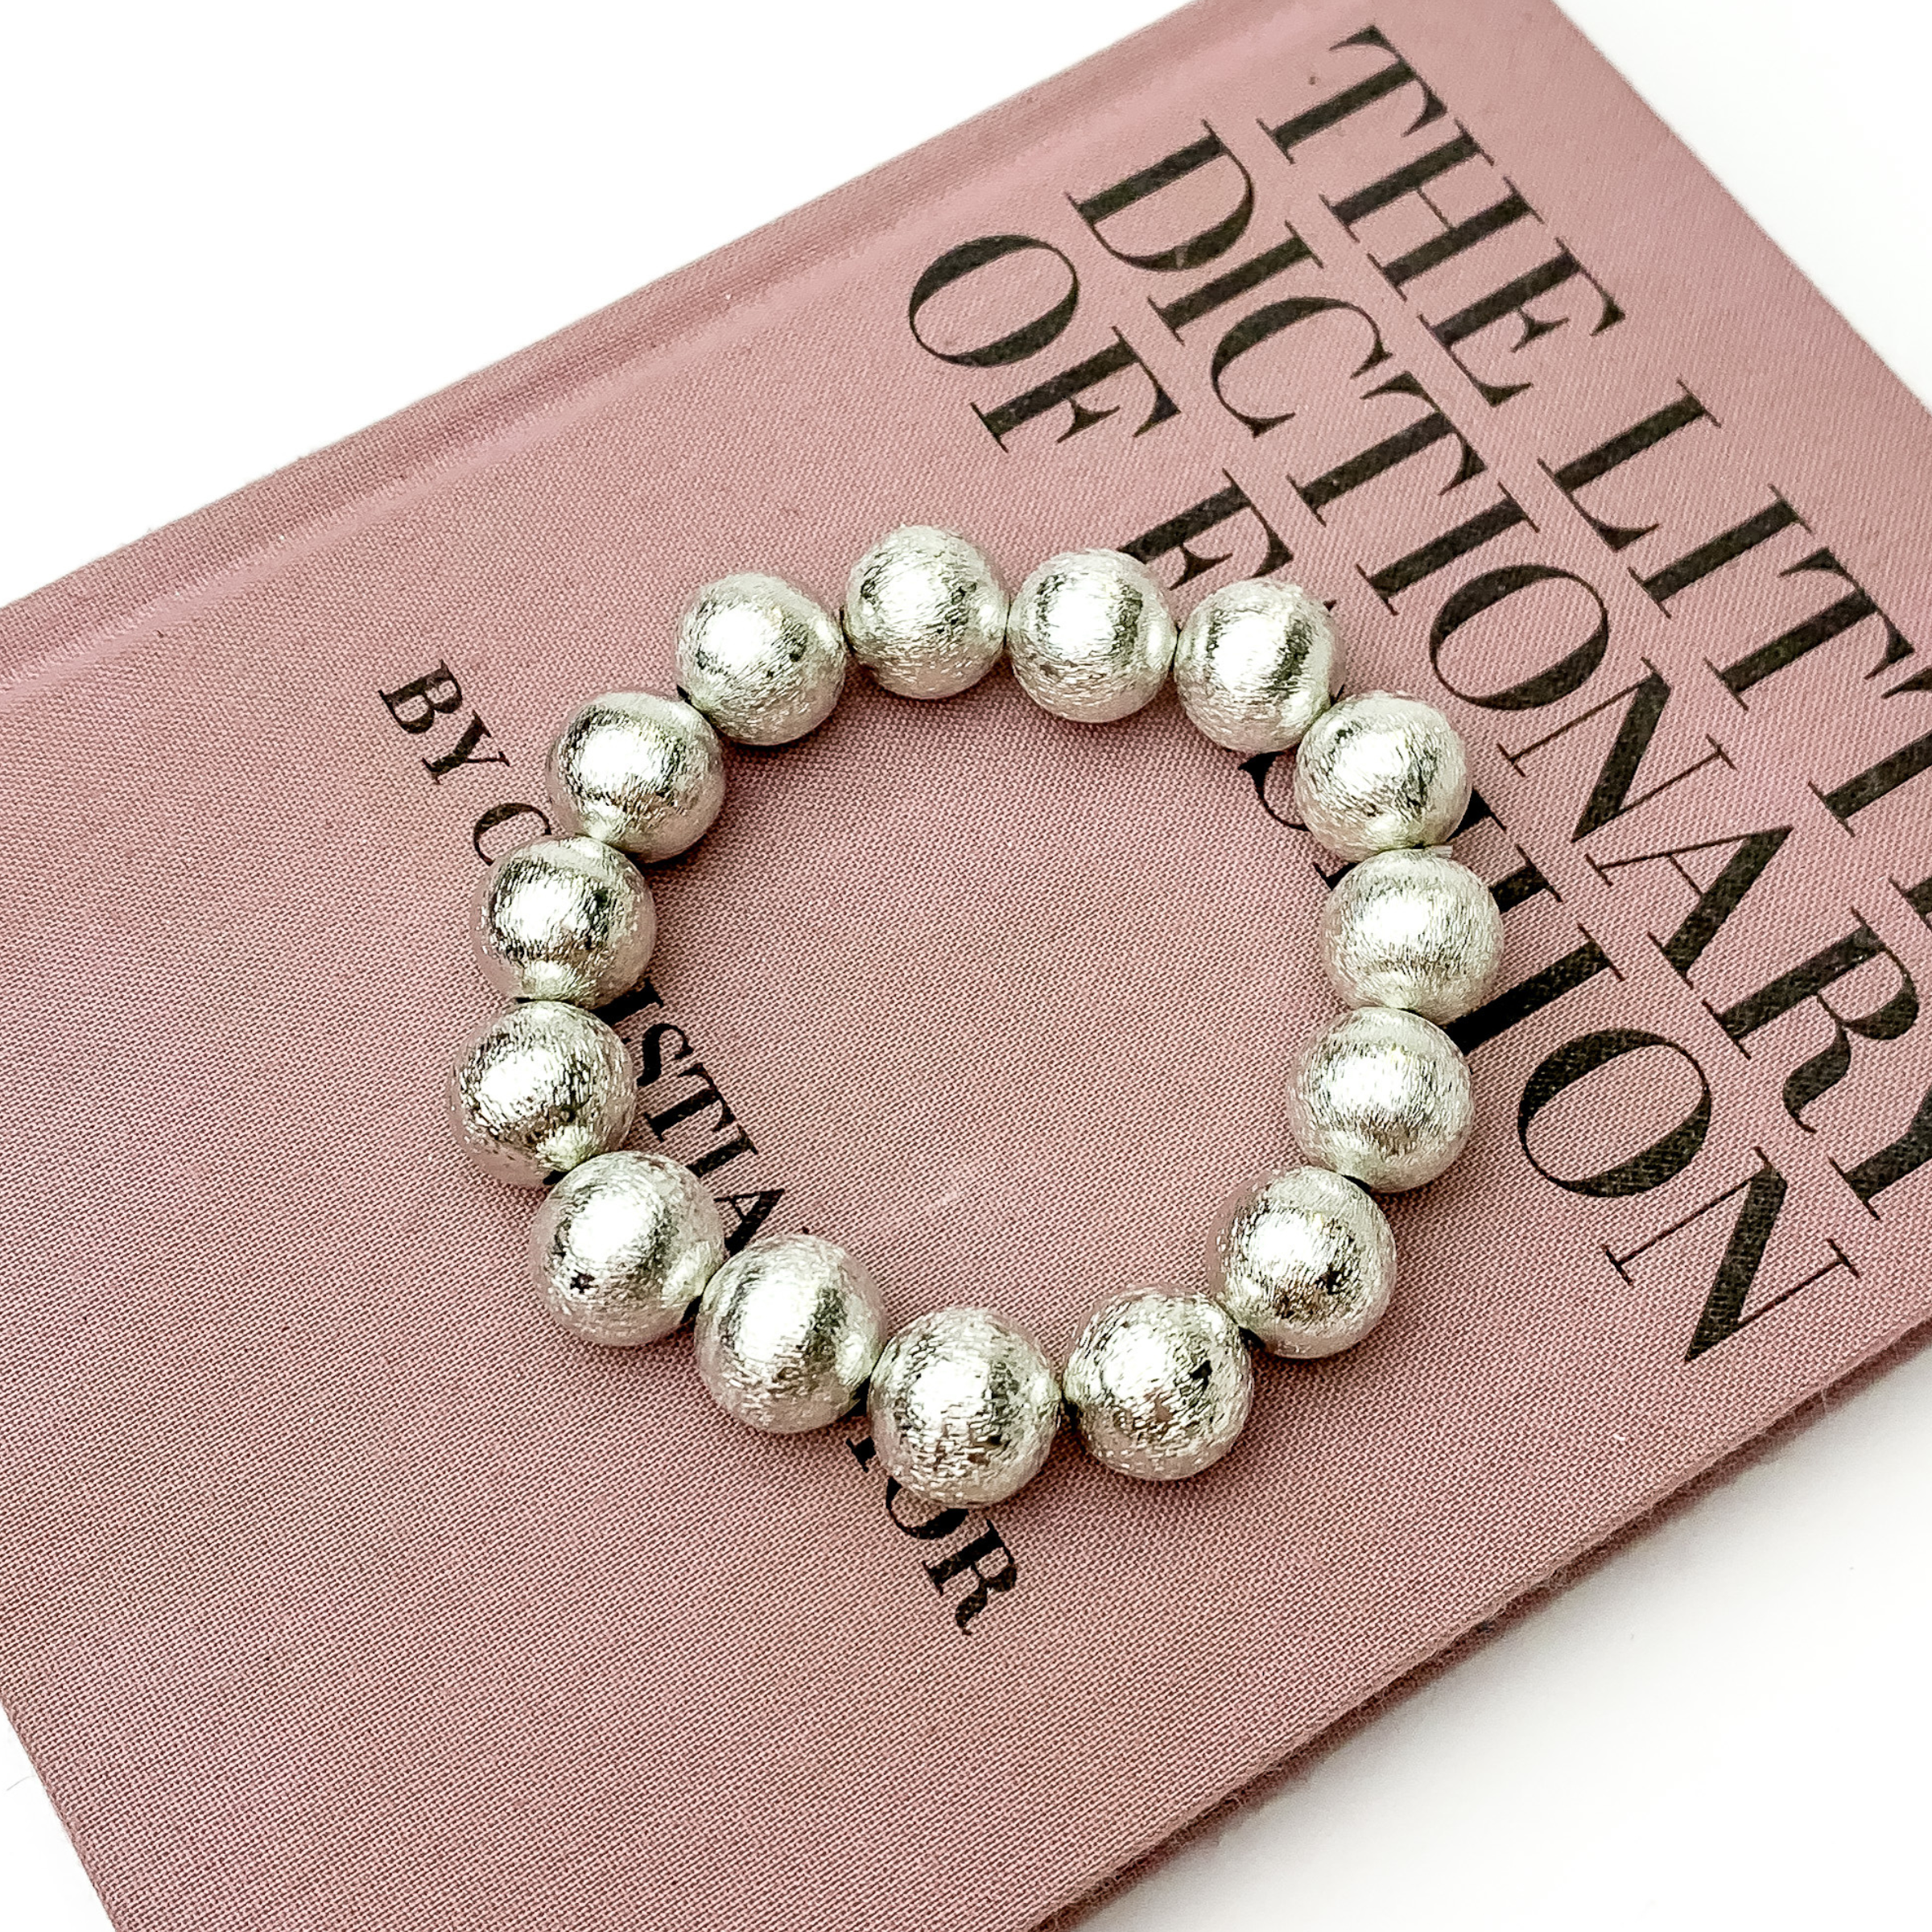 Large Silver Tone Beaded Bracelet - Giddy Up Glamour Boutique